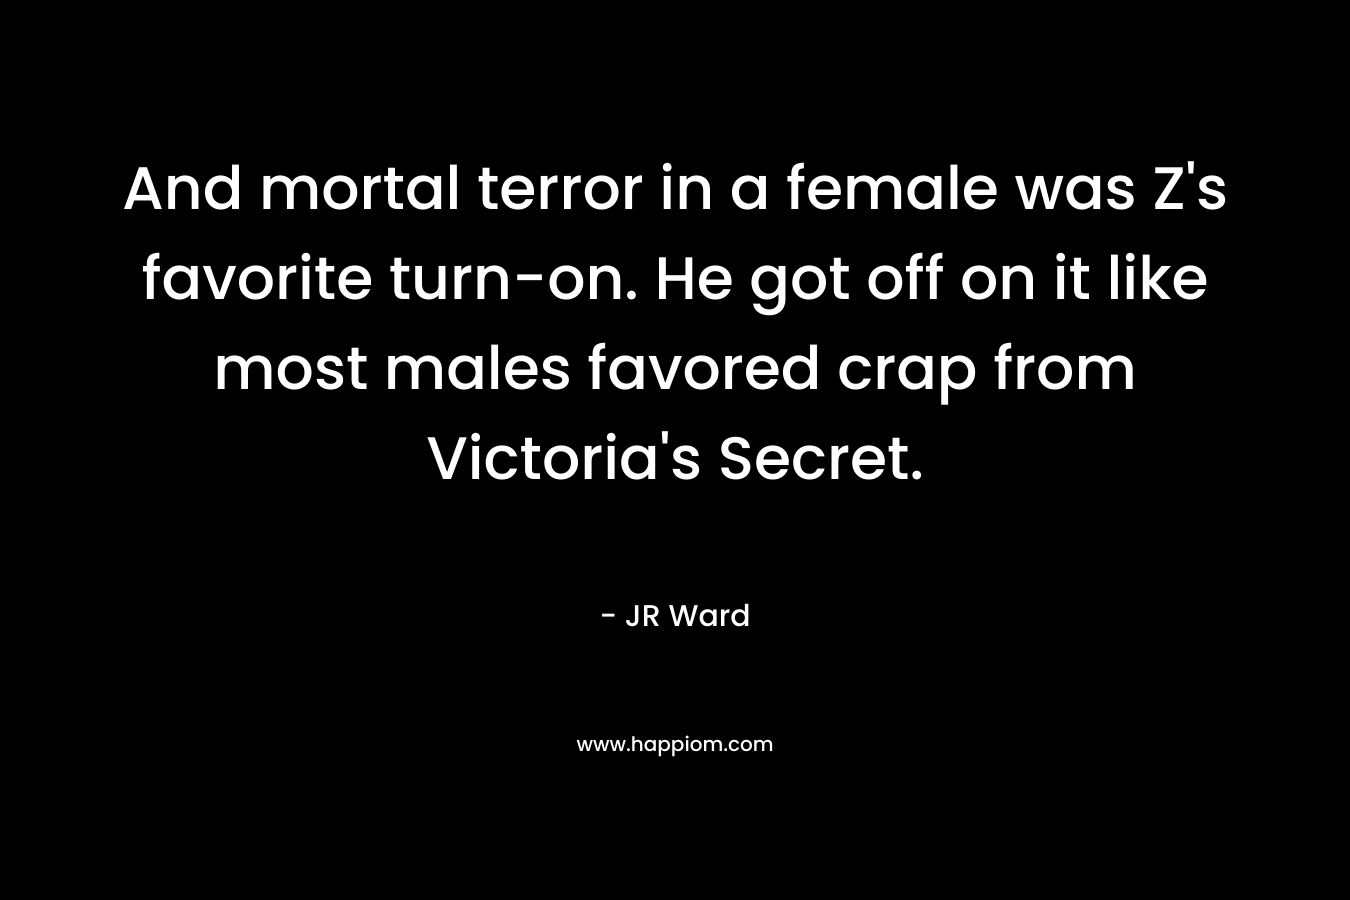 And mortal terror in a female was Z’s favorite turn-on. He got off on it like most males favored crap from Victoria’s Secret. – JR Ward